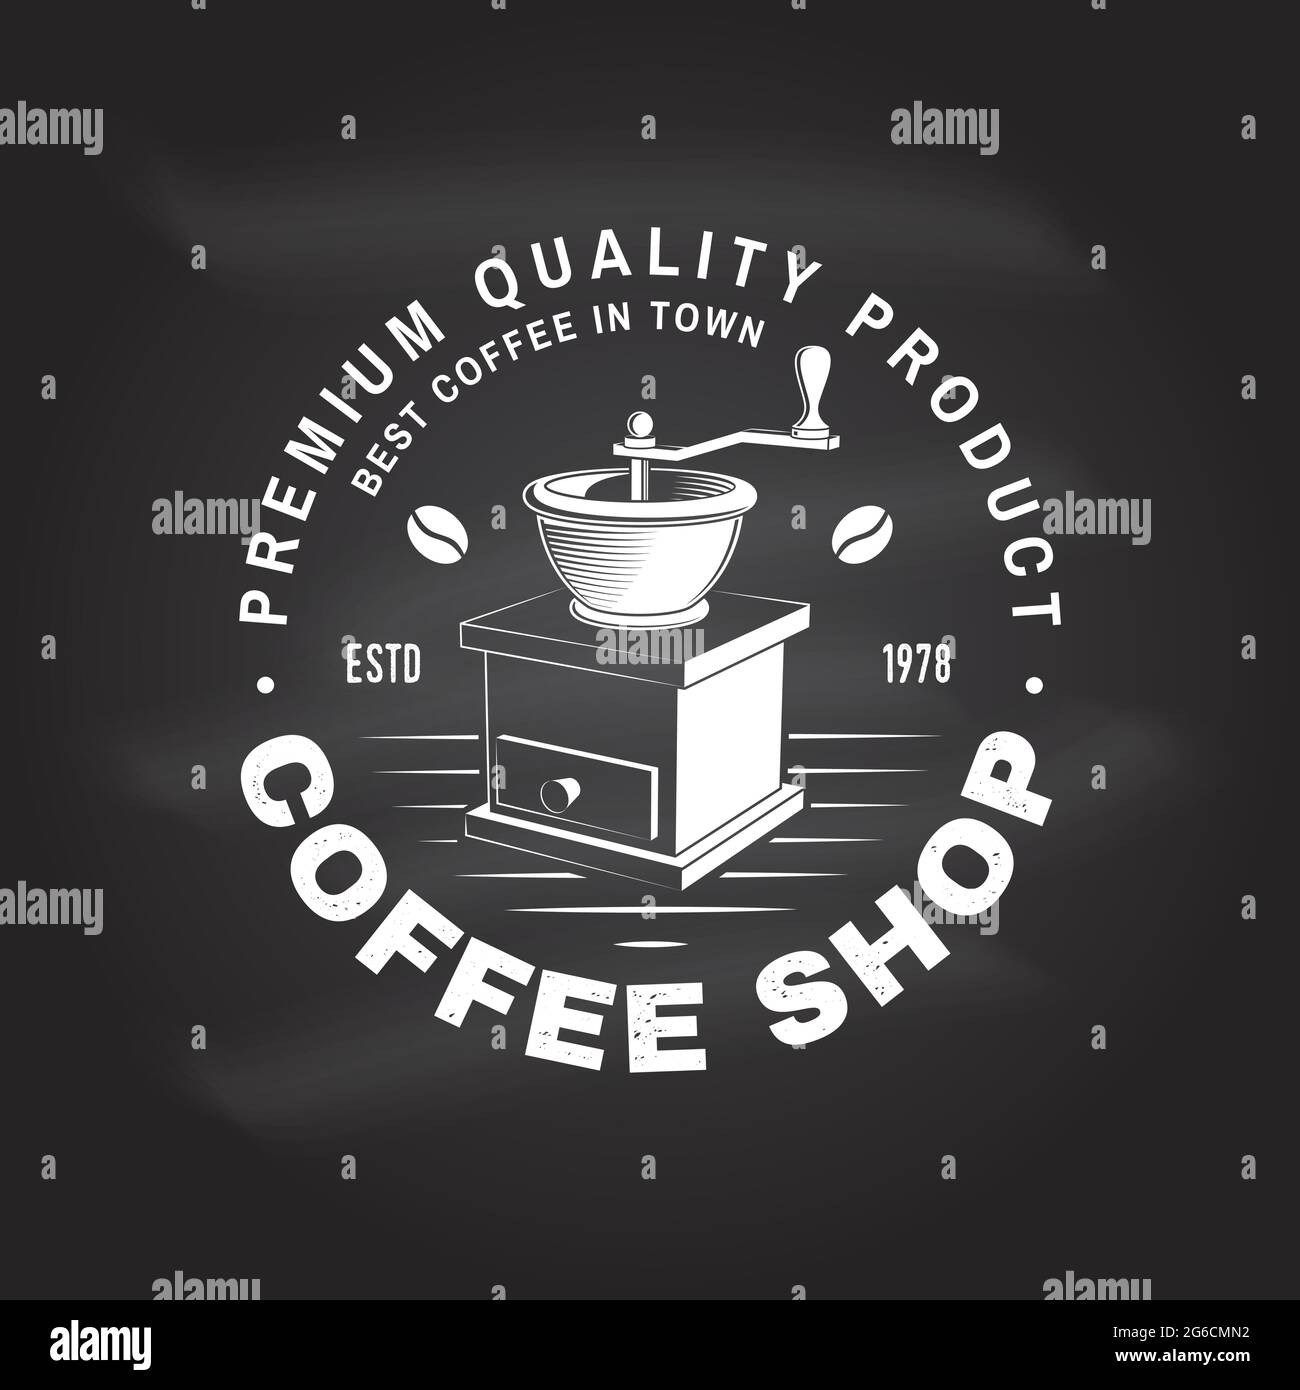 Coffe shop logo, badge template on the chalkboard. Vector illustration. Typography design with coffee grinder silhouette. Template for menu for restau Stock Vector